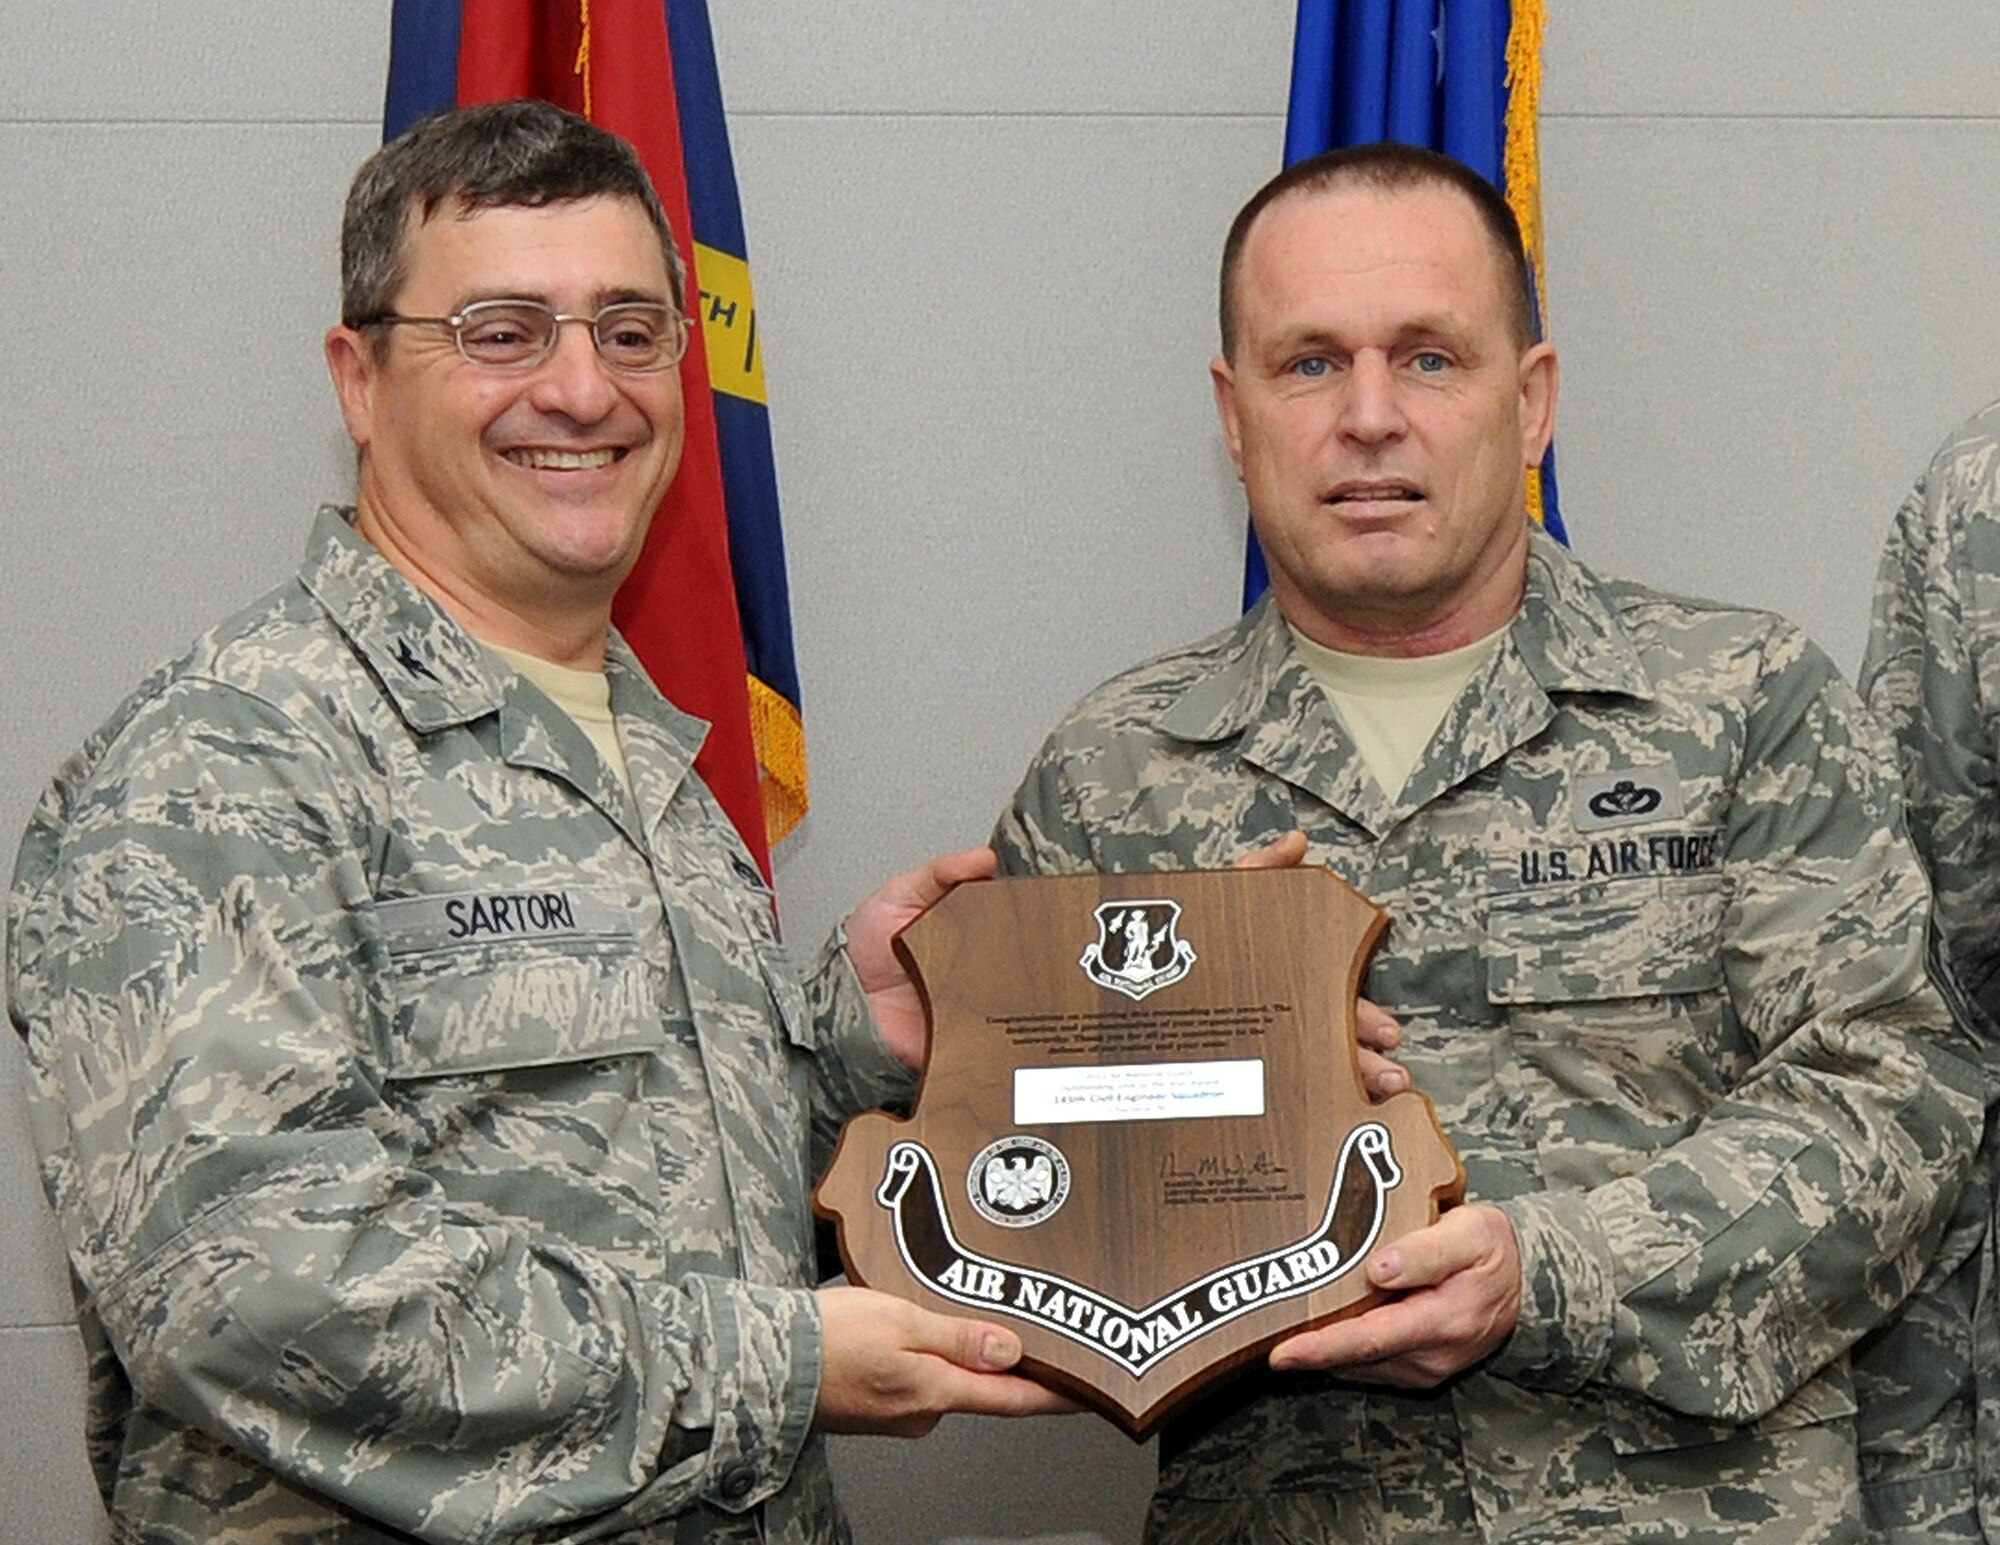 On May 16, 2013, Air Force Col. Peter “Puck” Sartori, Director of Installations and Mission Support and The Civil Engineer for the Air National Guard at Joint Base Andrews, Maryland, visited the 145th Airlift Wing, North Carolina Air National Guard base to present the Colonel William L. Deneke Award, National Guard Bureau/A7 Outstanding Unit of the Year, to Chief Master Sgt. Tom Hunsucker, Regional Training Site Enlisted Manager for the 145th Civil Engineering Squadron. This annual award is in recognition of the most outstanding CE Air Reserve Component unit. The criteria to be honored with this award are showing the greatest achievement and exemplary performance in Expeditionary Engineering, Installation Engineering, Environmental Leadership, Emergency Service and Training Excellence. 
(U.S. Air National Guard photo by Tech. Sgt. Patricia Findley/Released)
